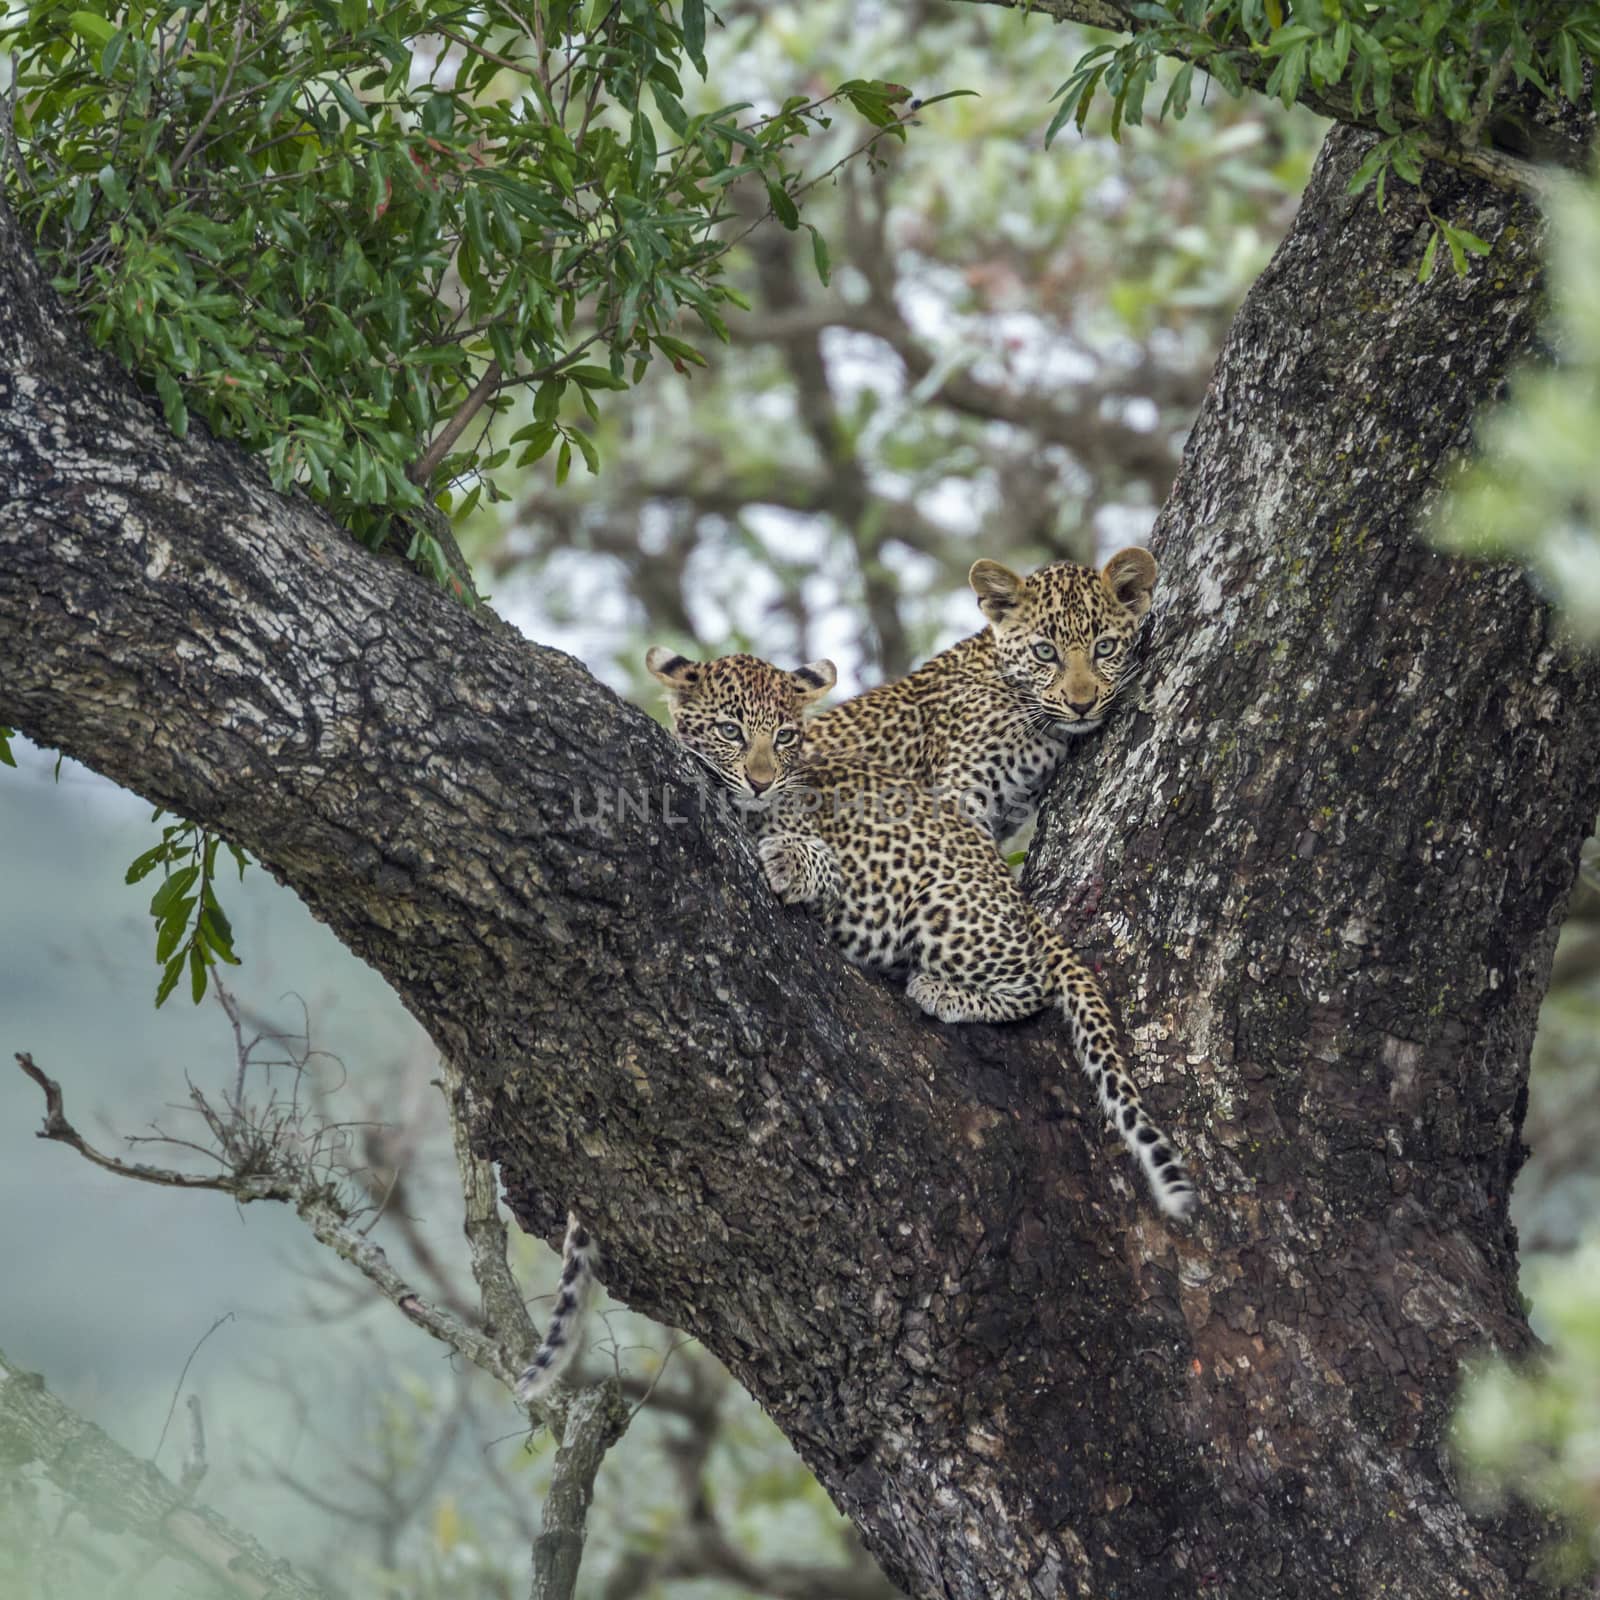 Two young Leopard lying down in a tree in Kruger National park, South Africa ; Specie Panthera pardus family of Felidae